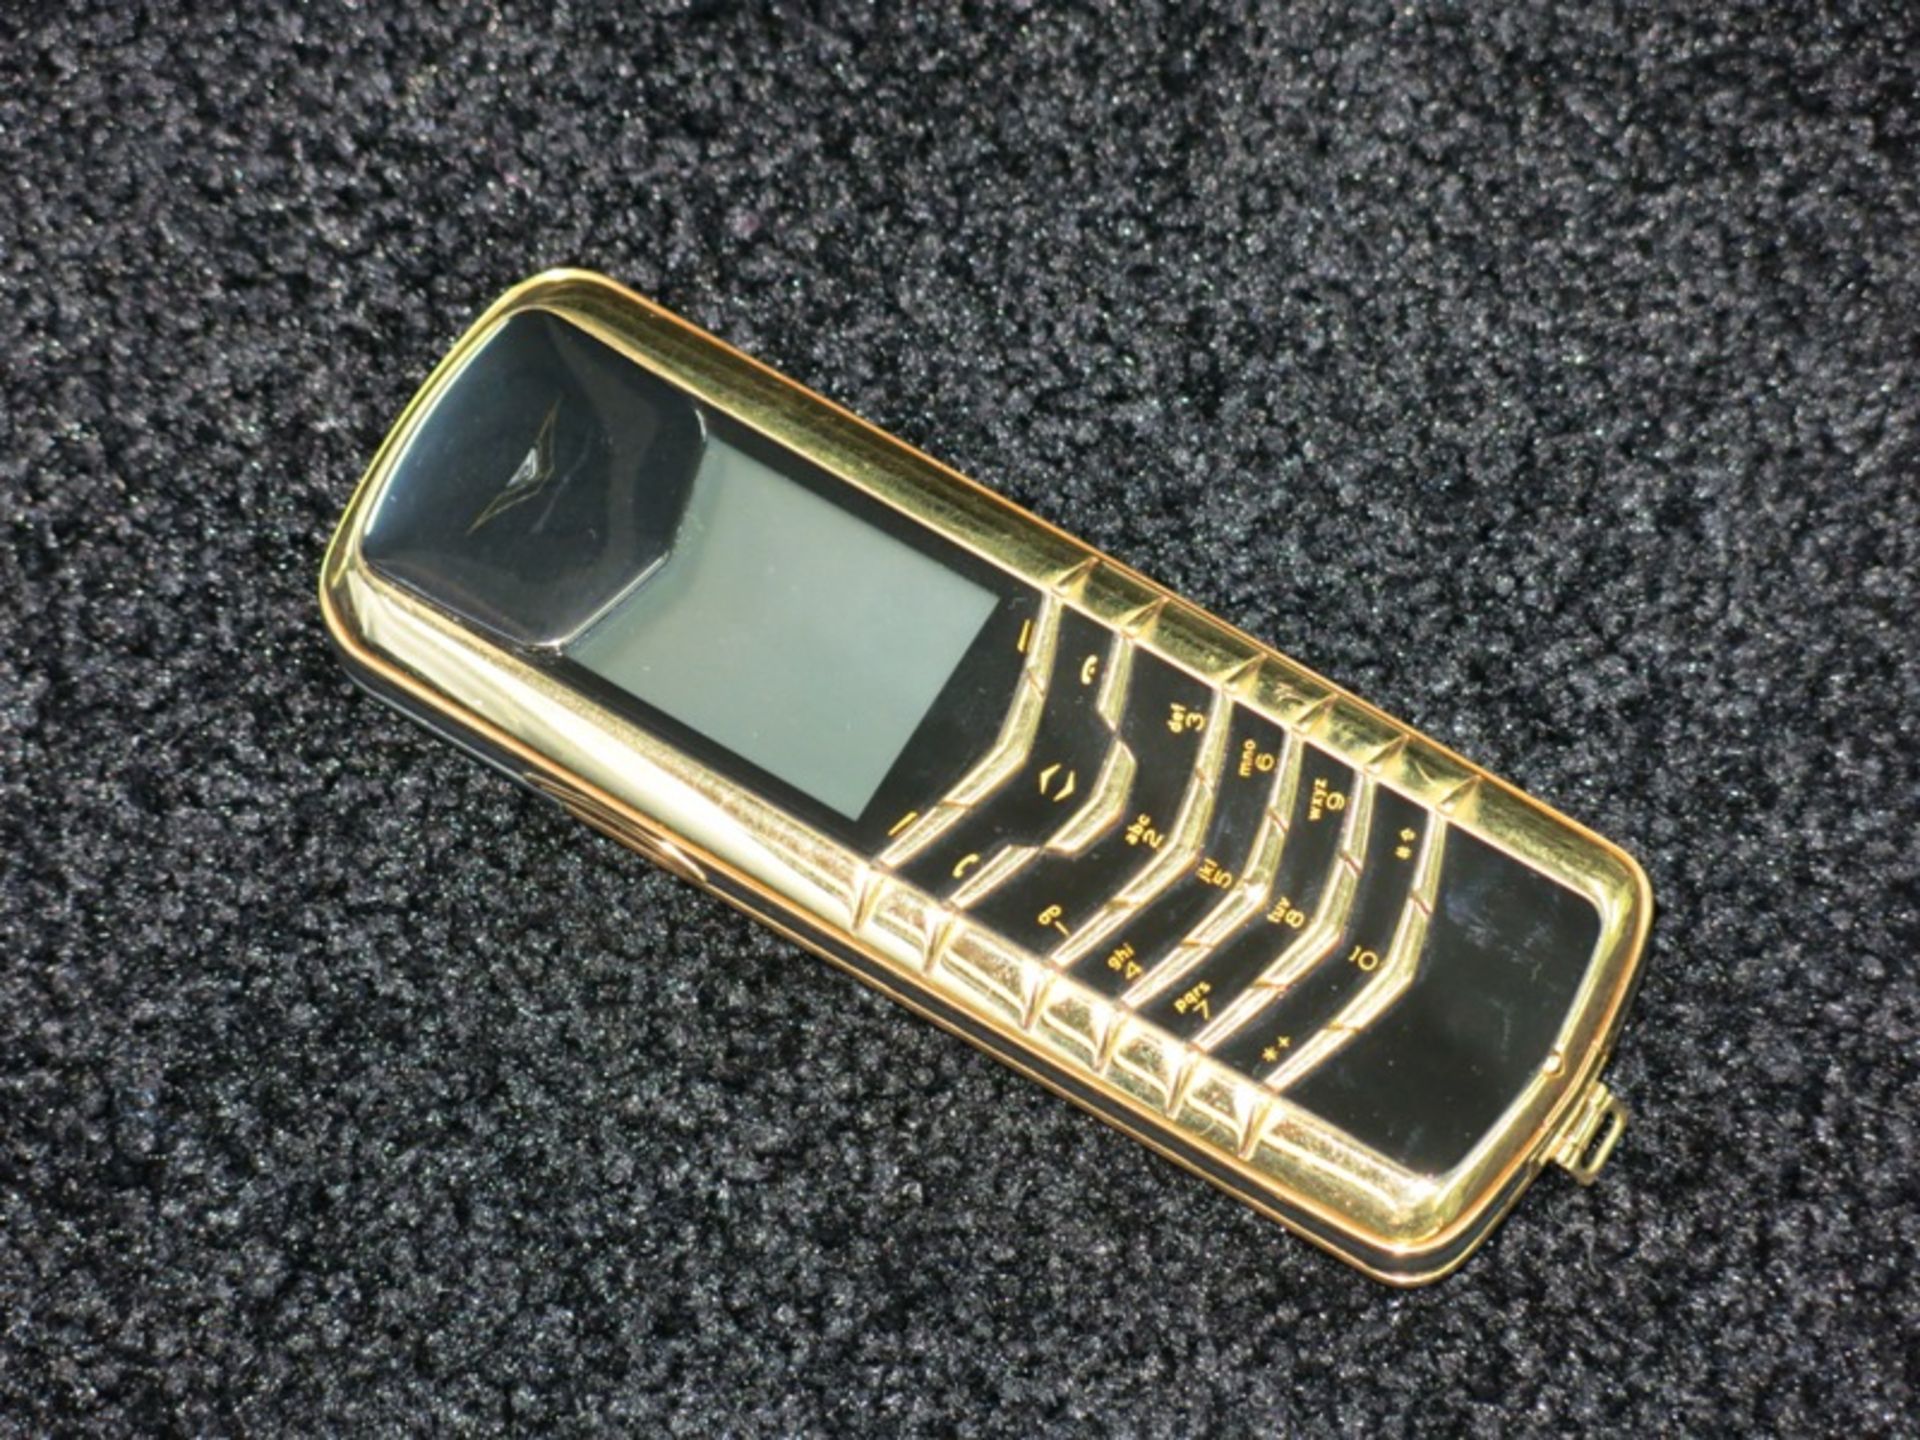 Vertu Signature Classic Phone in 18kt Brushed Yellow Gold with 18kt Polished Yellow Gold - Image 7 of 7